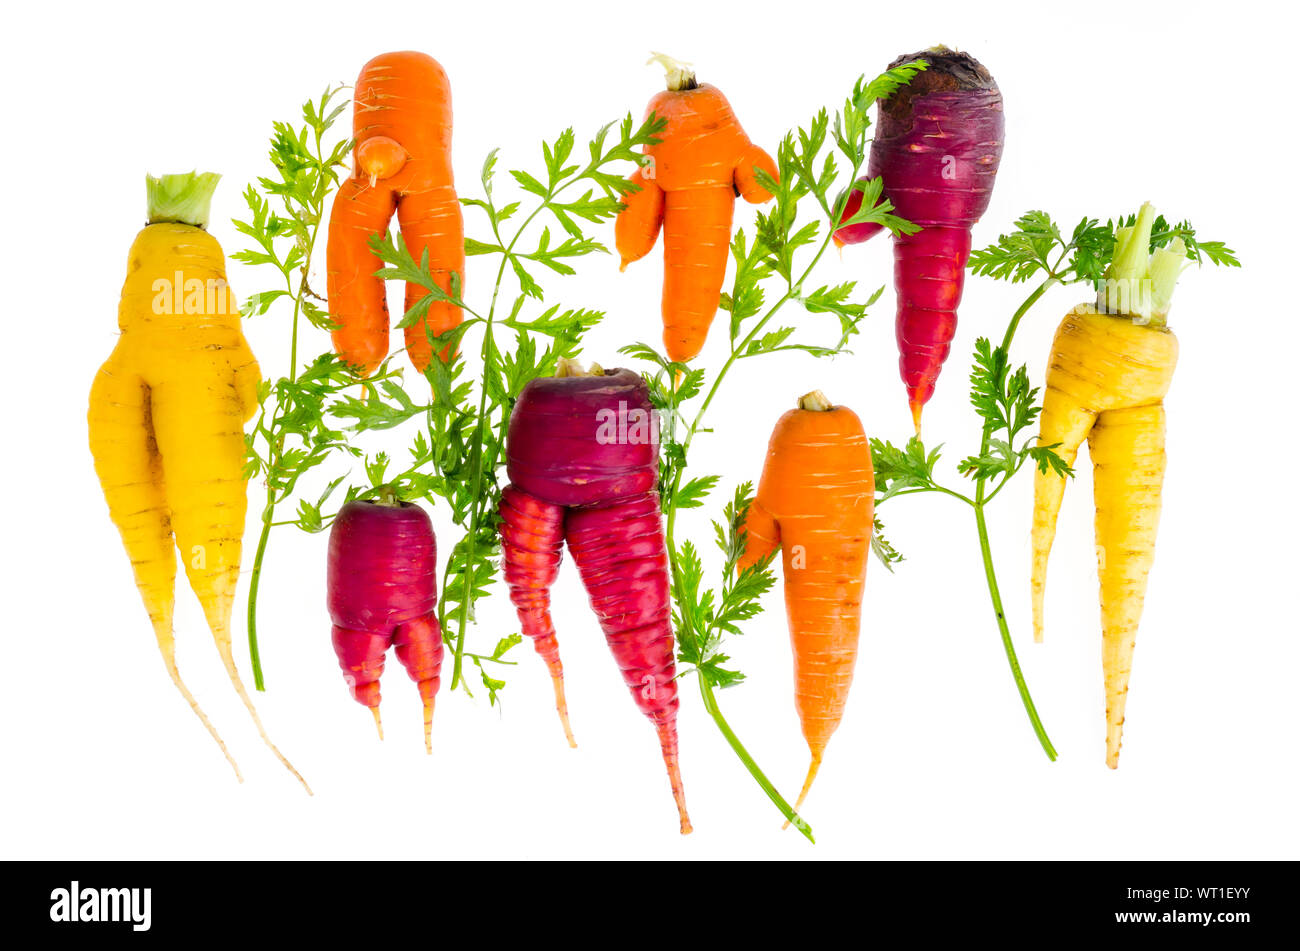 Ugly, deformed fresh organic carrots different color. Studio Photo Stock Photo